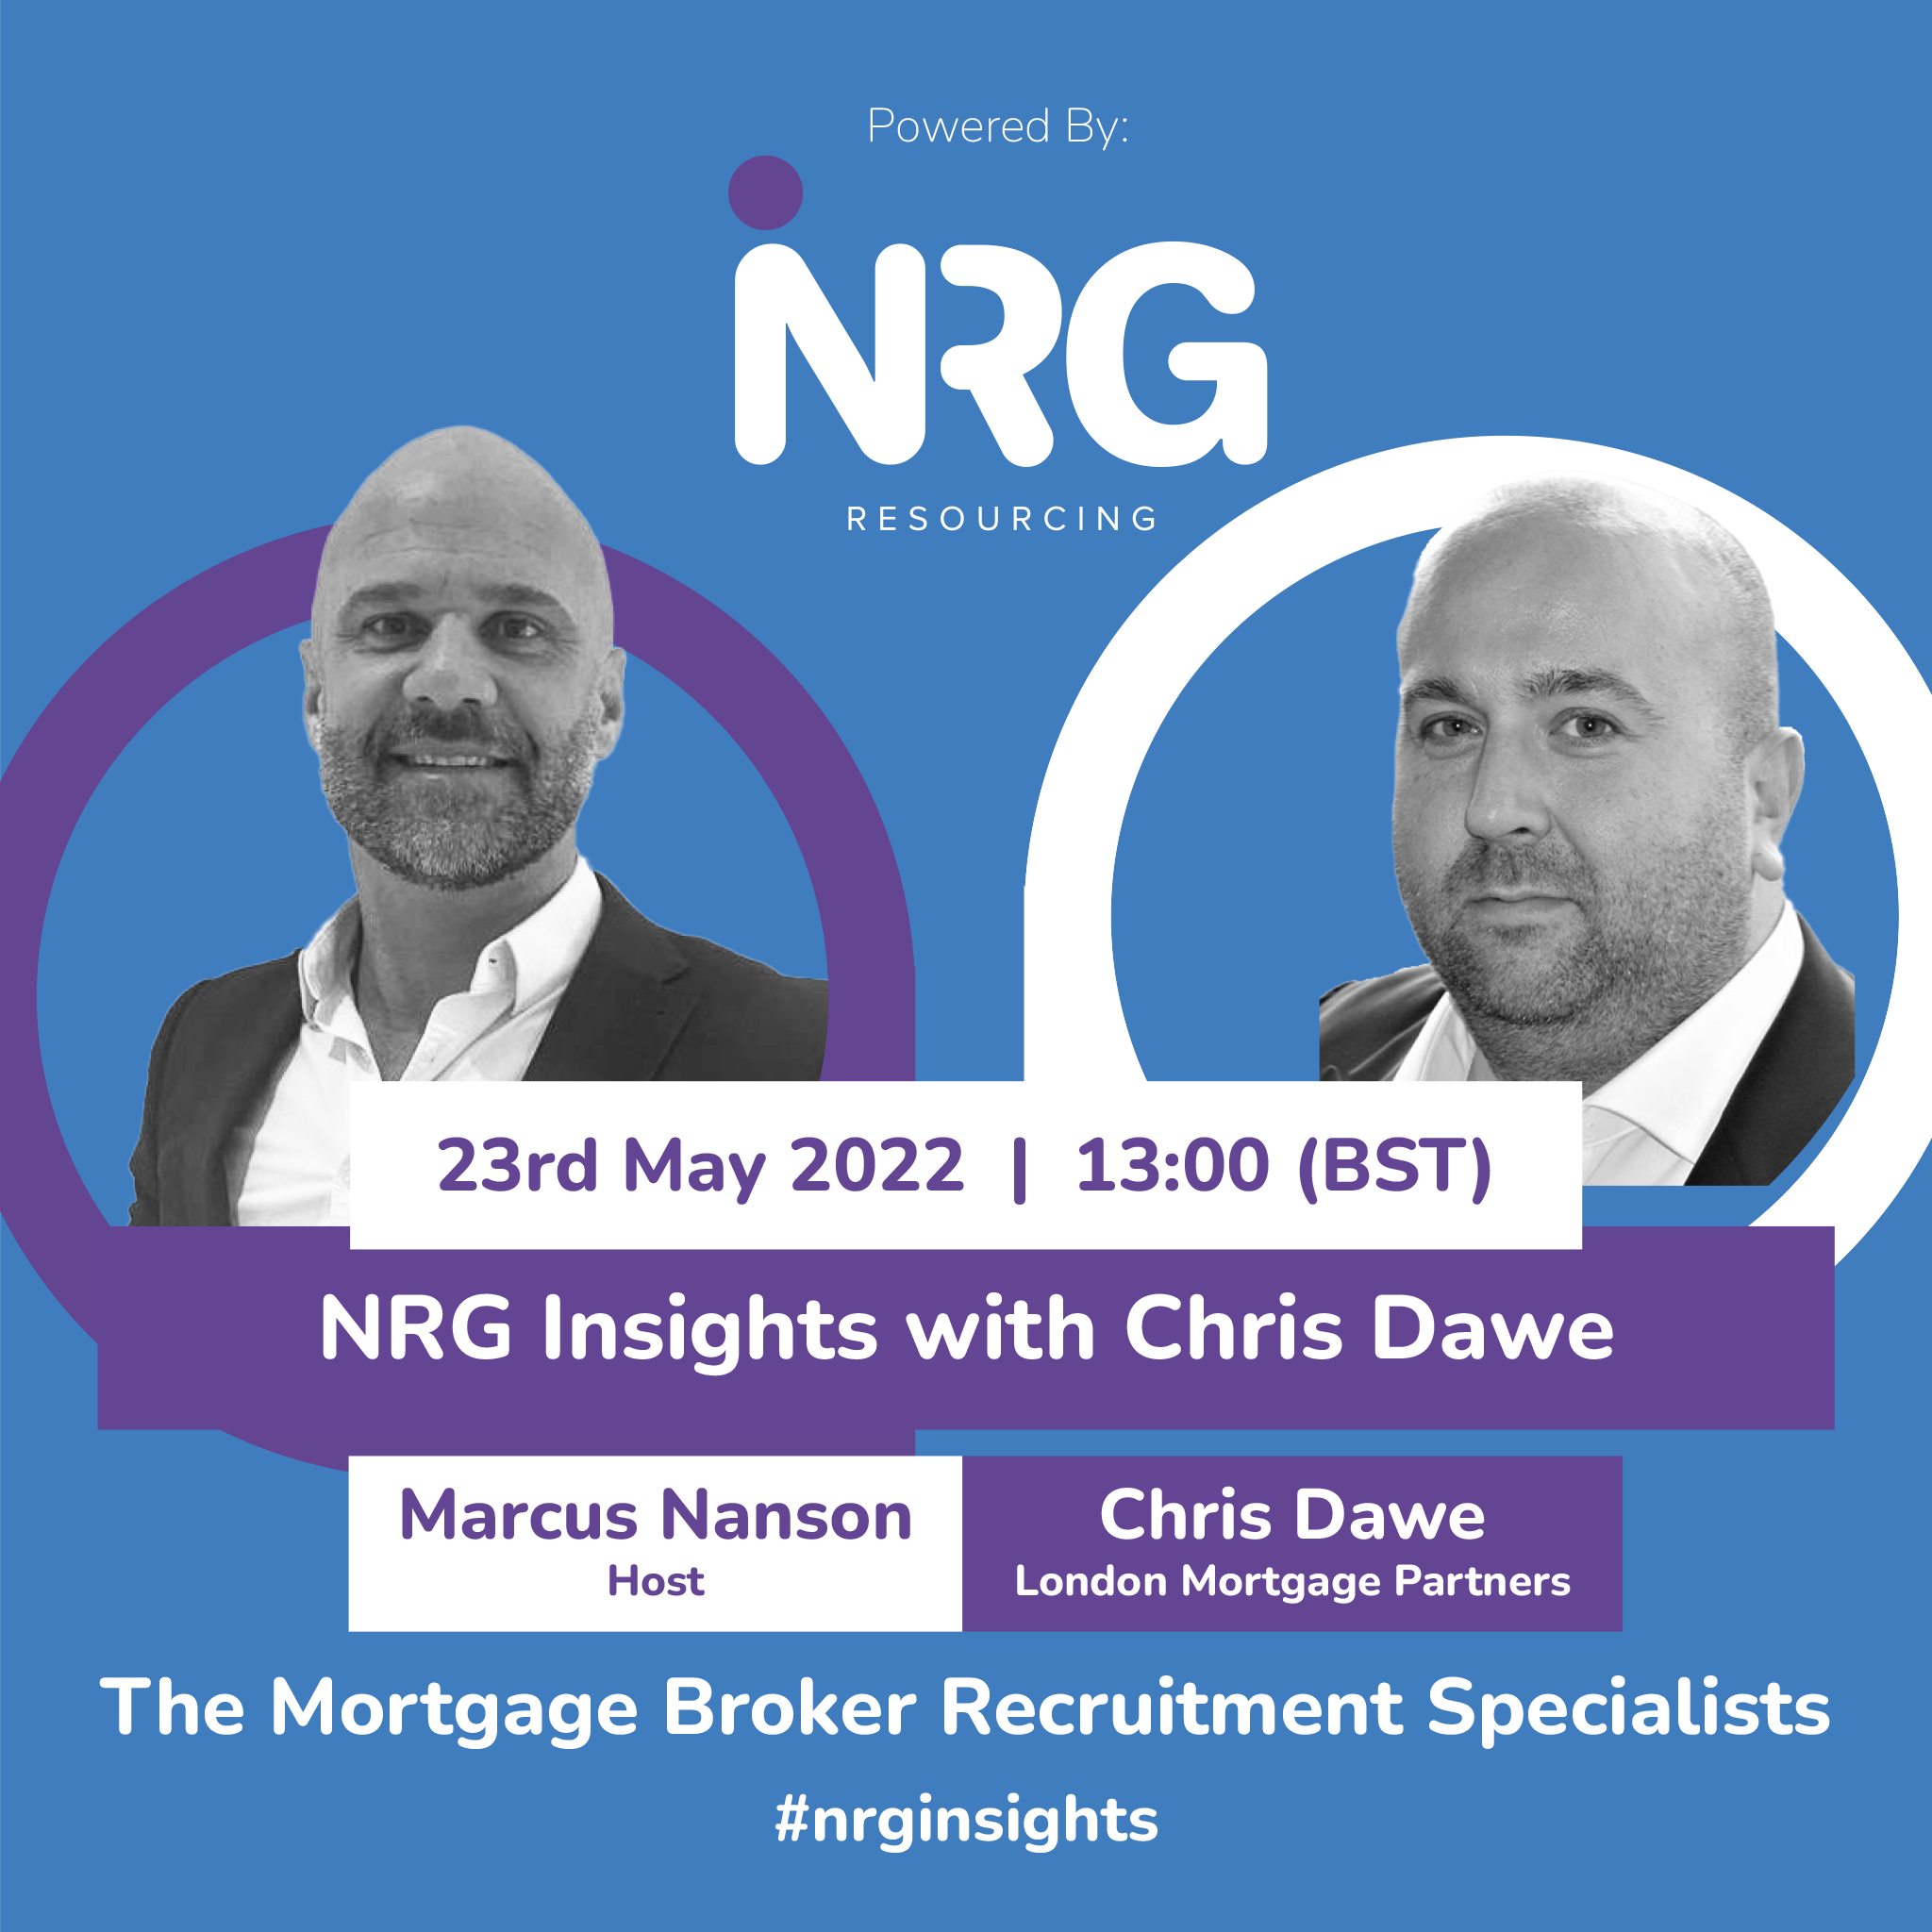 London Mortgage Partners flyer, showing hosts Marcus Nanson and Chris Dawe